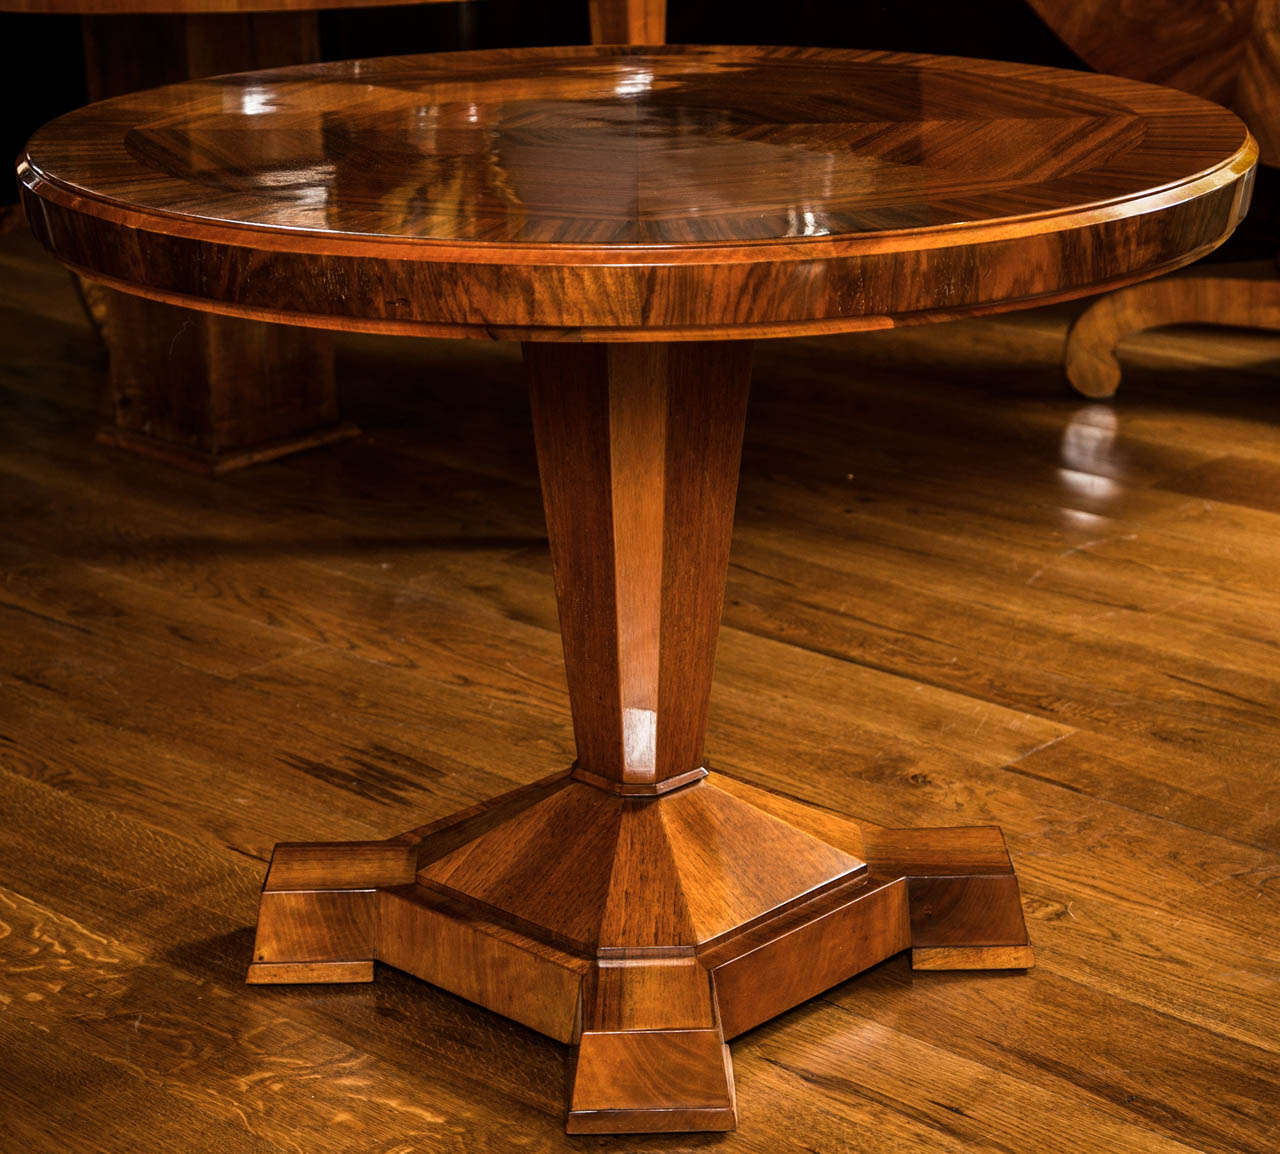 Cool Continental circular side table in rosewood veneer with angular center pedestal and base, 1930's,recently French polished